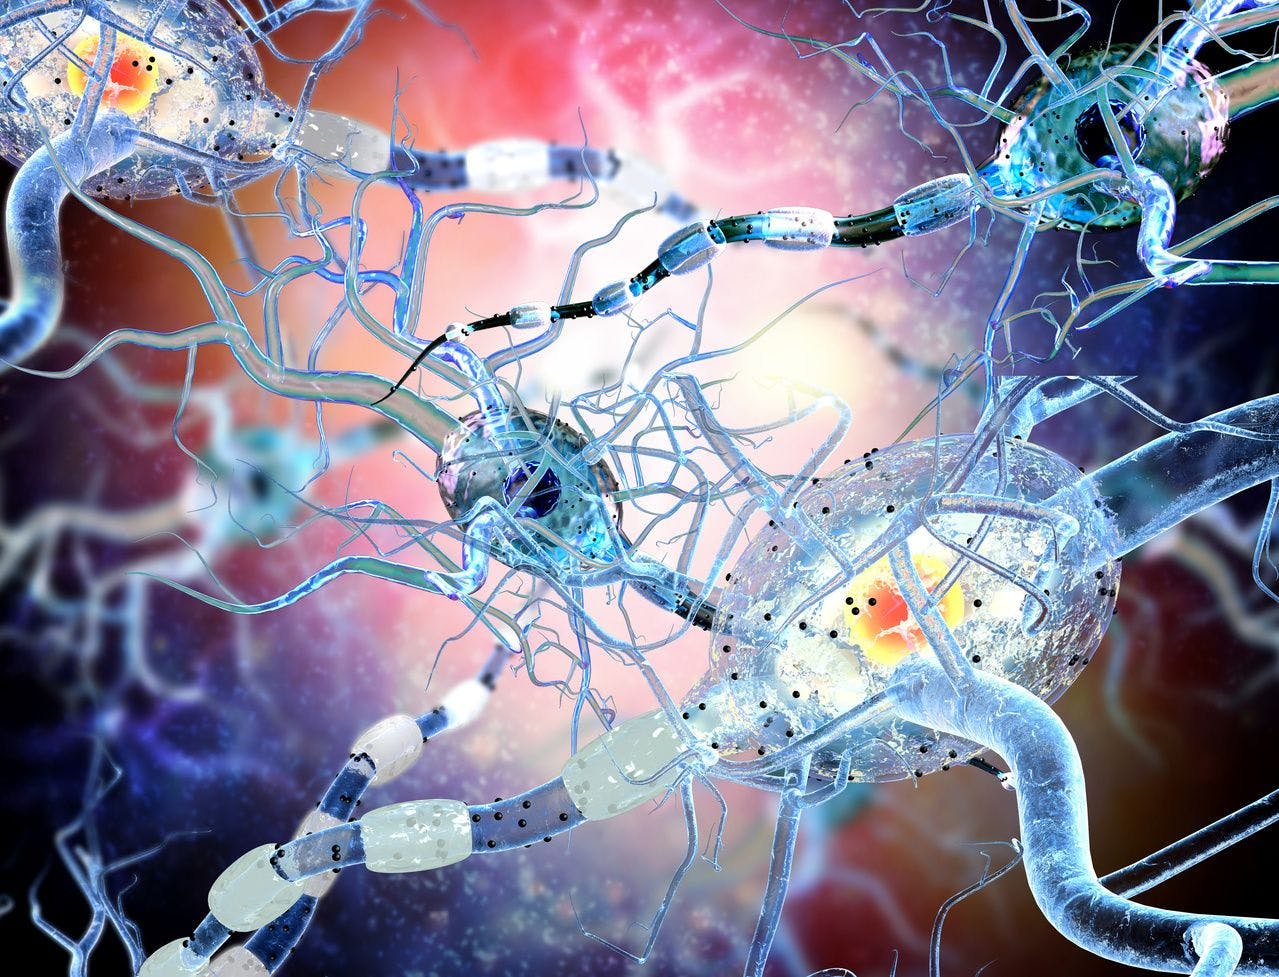 Fingolimod Linked with Lower Relapse Rate in Pediatric Patients with Multiple Sclerosis